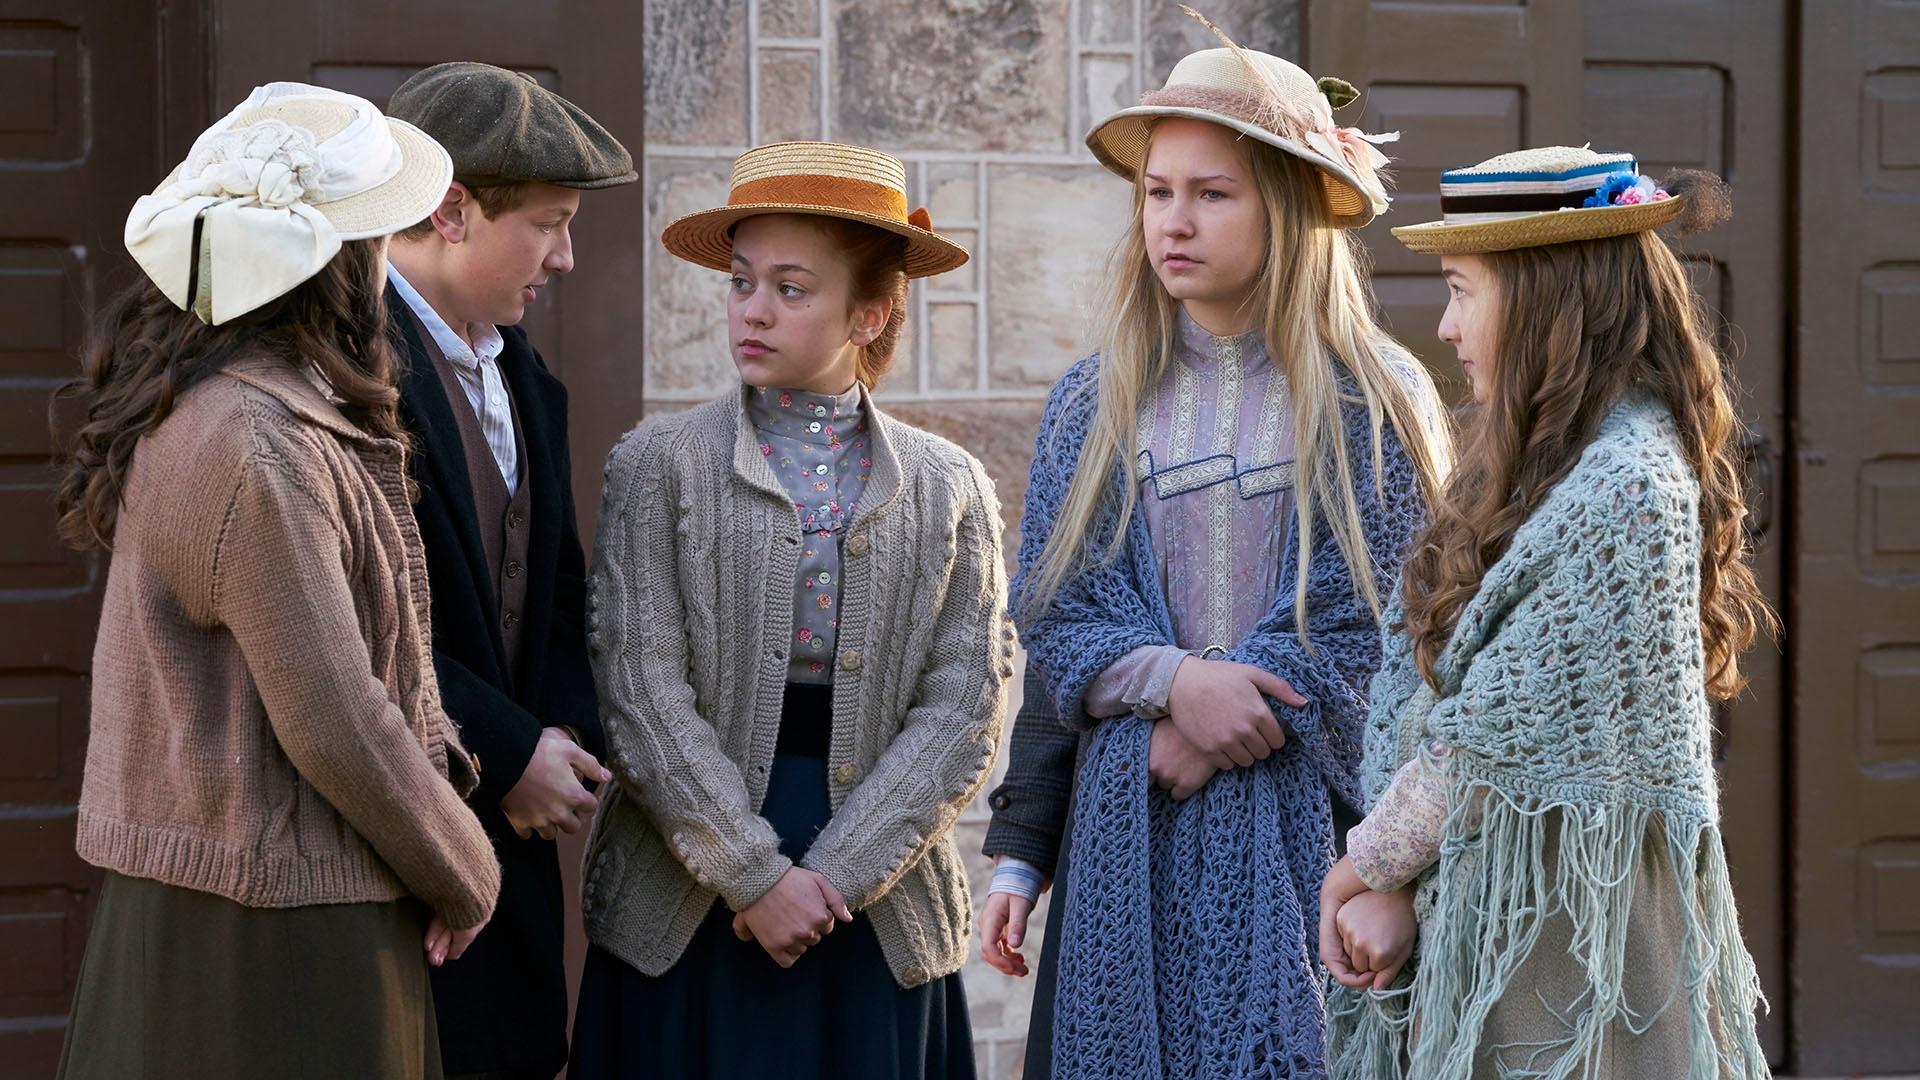 From left: Ruby Gillis, Gilbert Blythe, Anne Shirley, Josie Pye, and Jane Andrews.